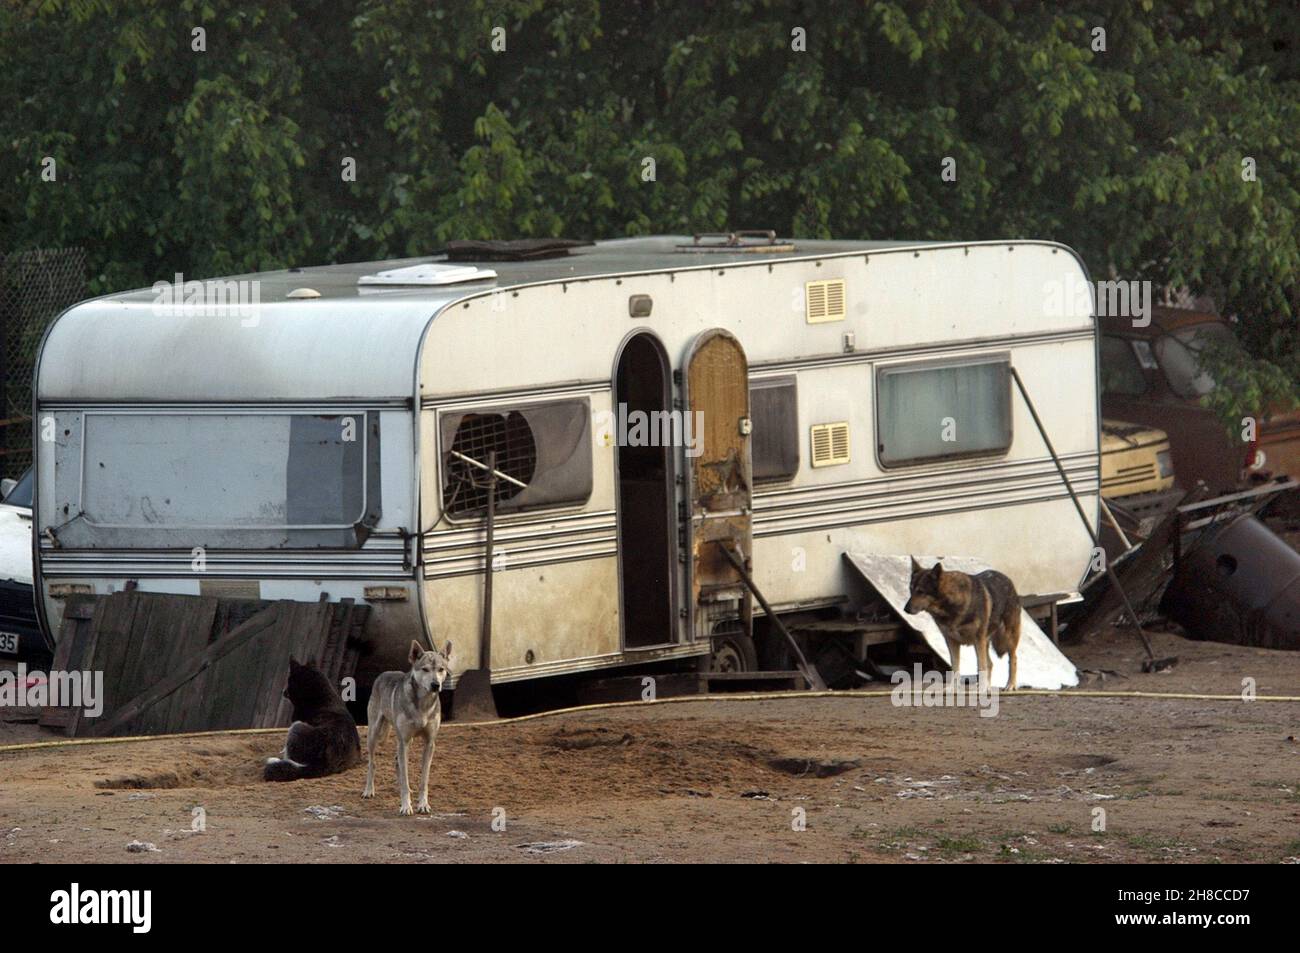 domestic dog (Canis lupus f. familiaris), dogs at a run-down caravan, animal hoarding, Germany Stock Photo